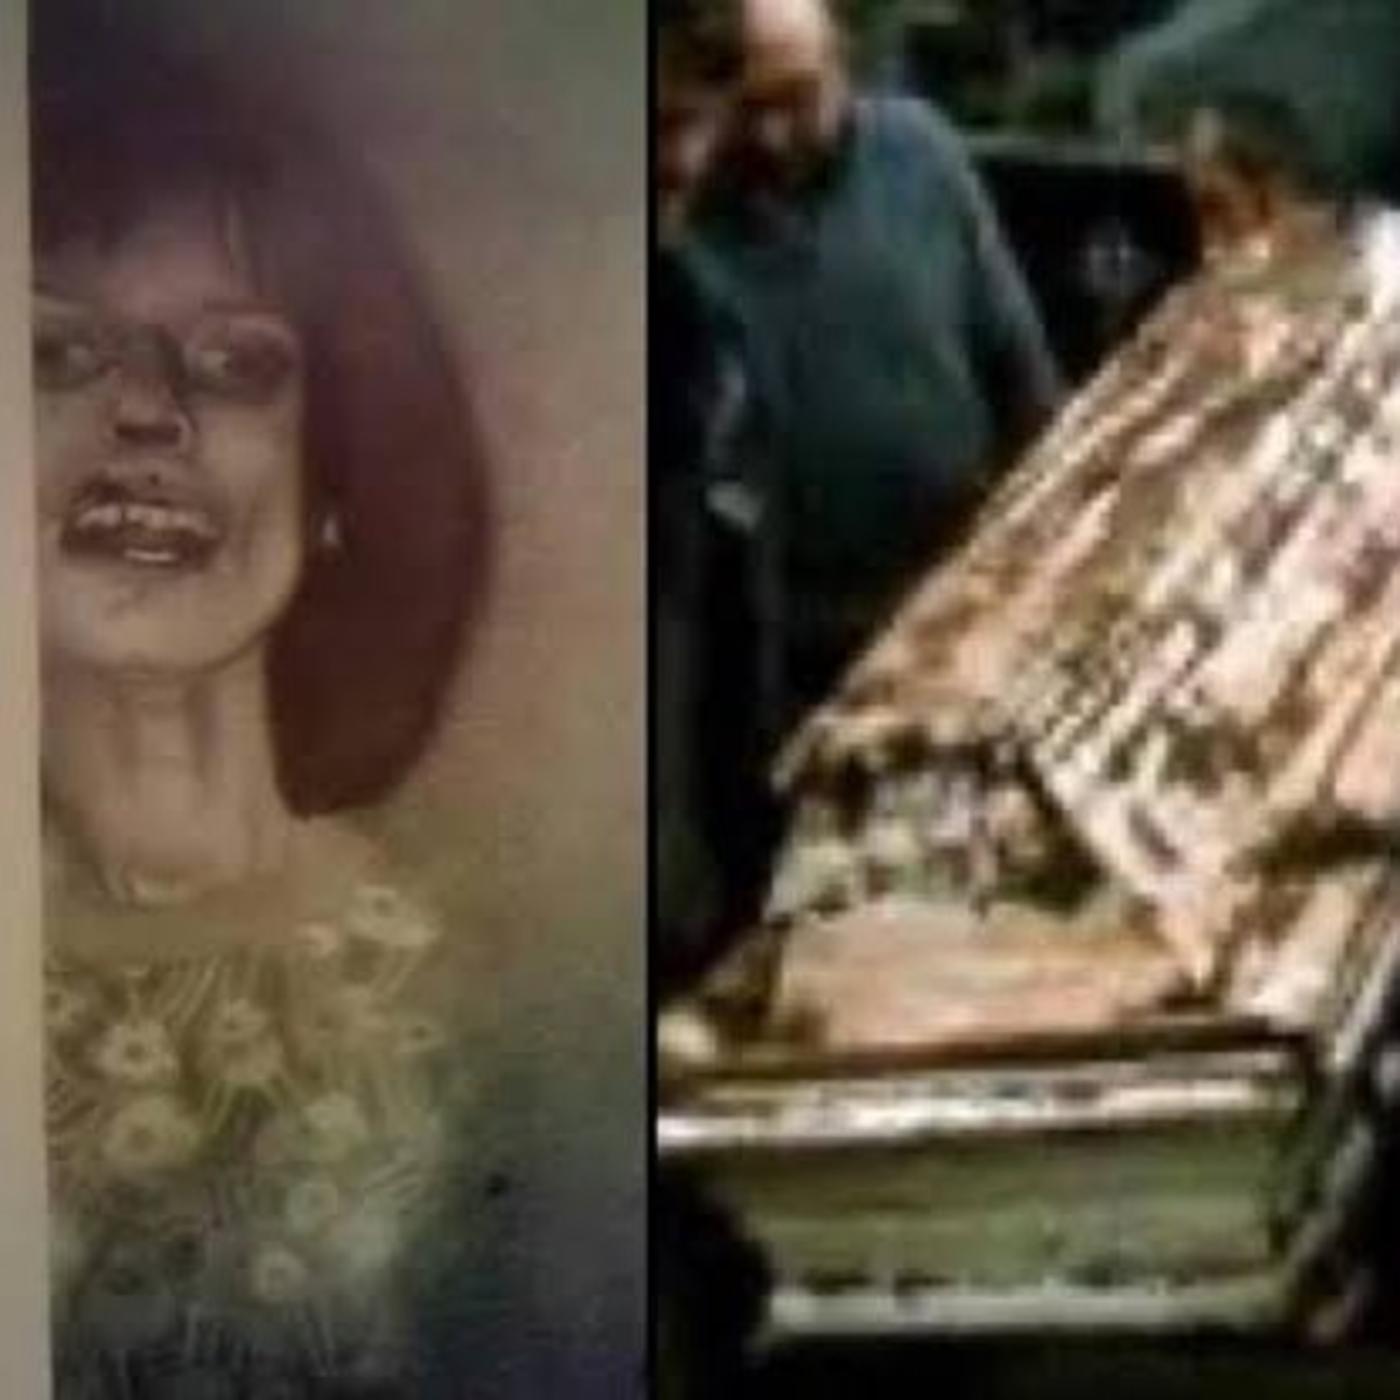 Anneliese Michel exorcism; people holding Anneliese Michel coffin